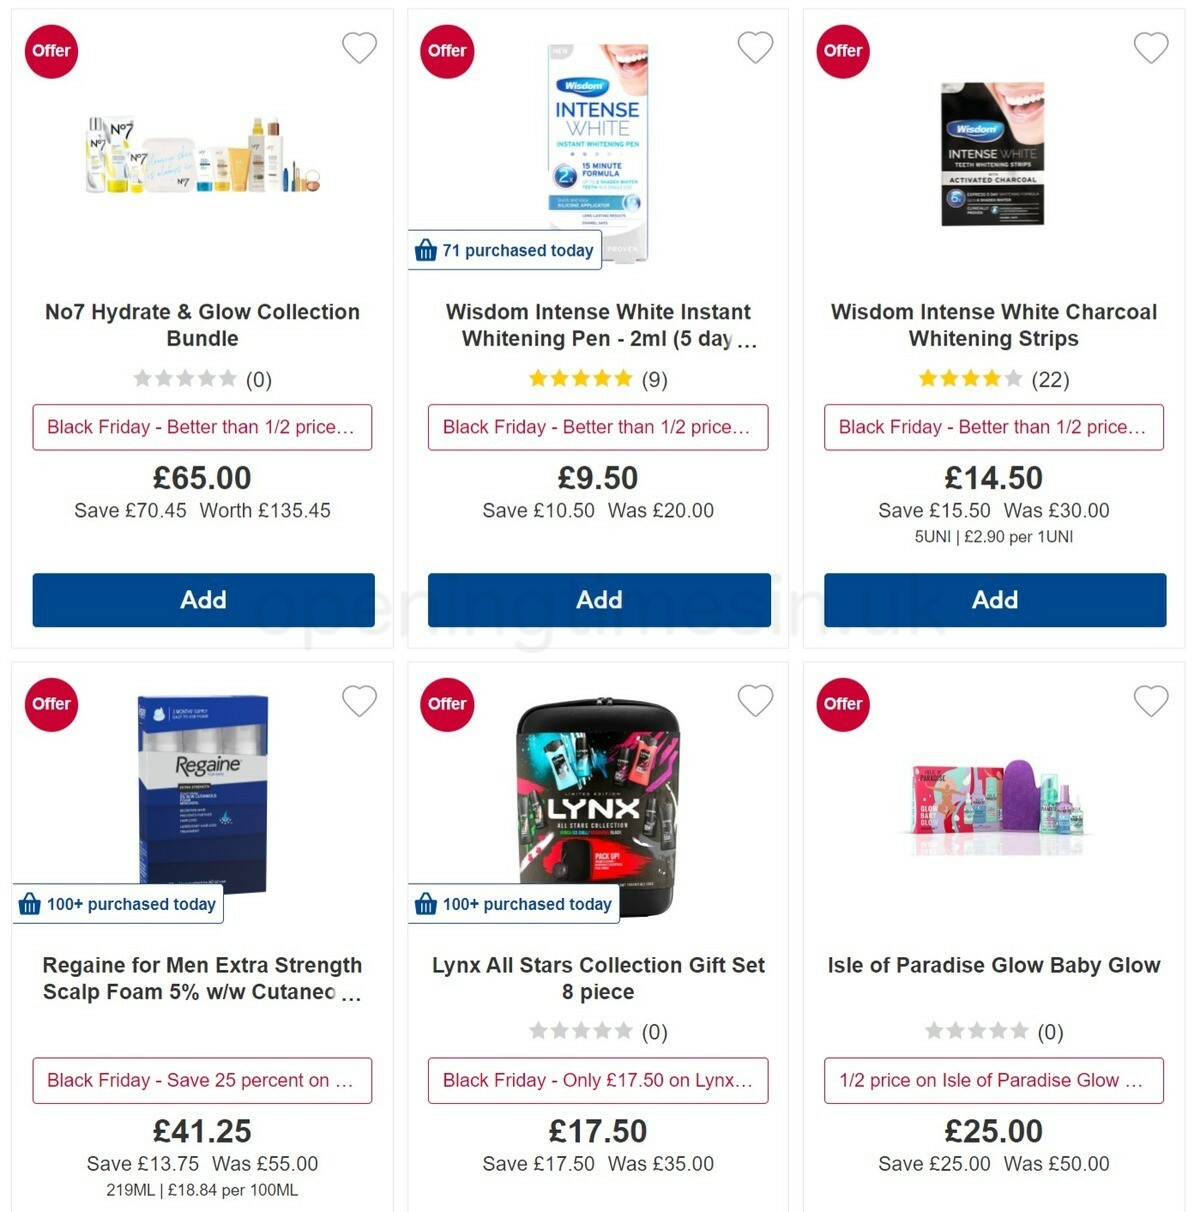 Boots Offers from 18 November